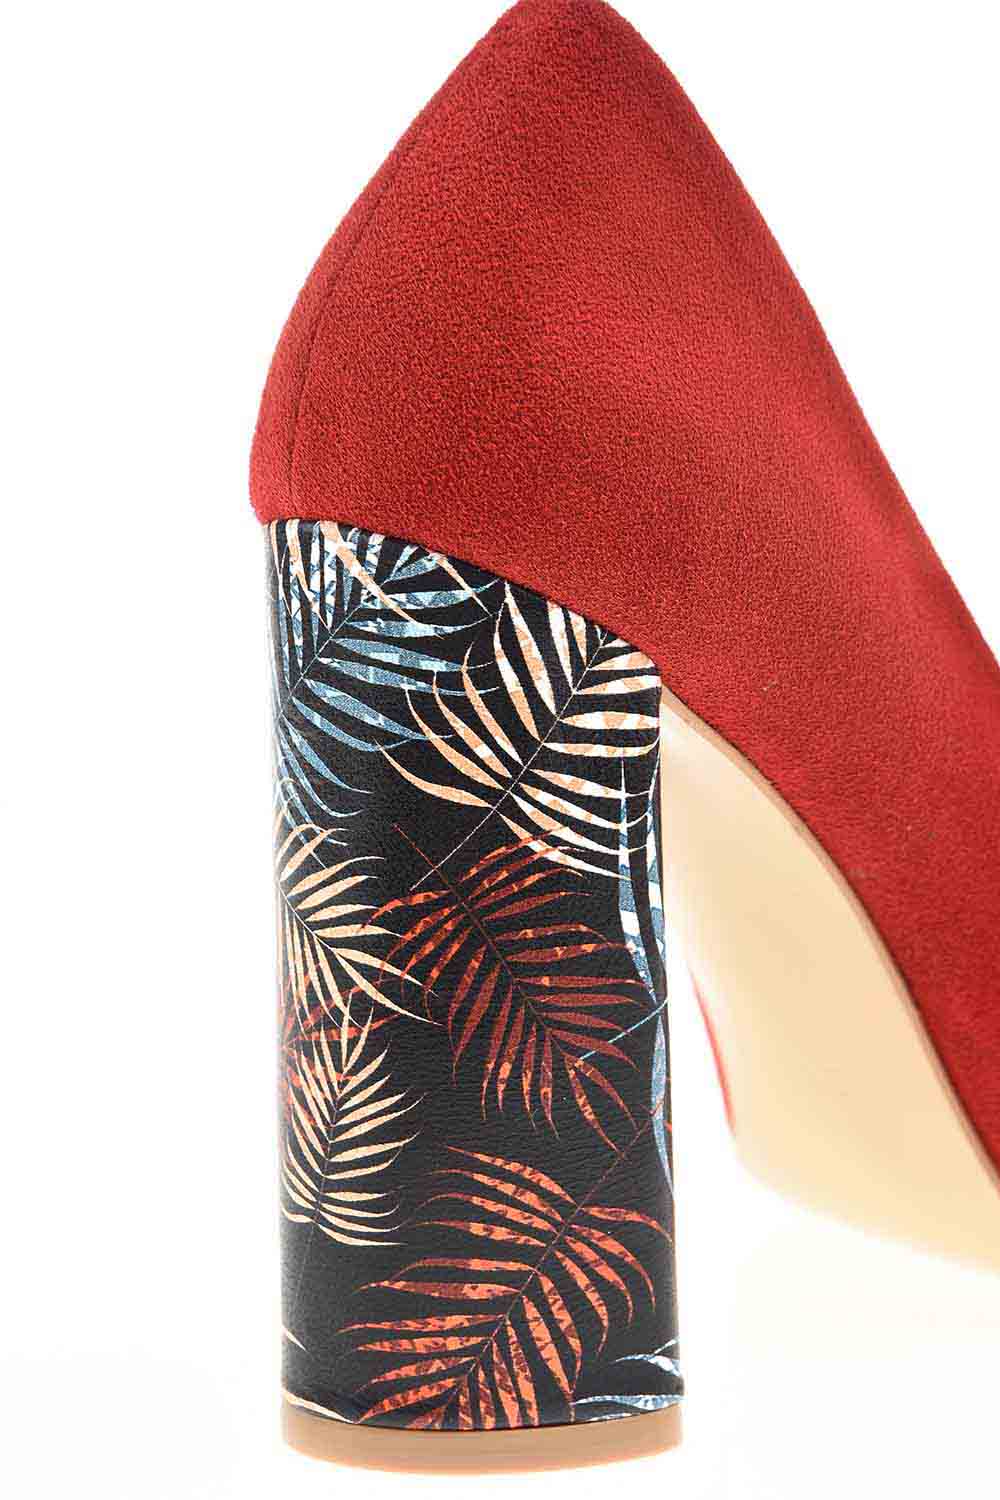 Patterned Thick Heeled Leather Shoes (Orange-Red)